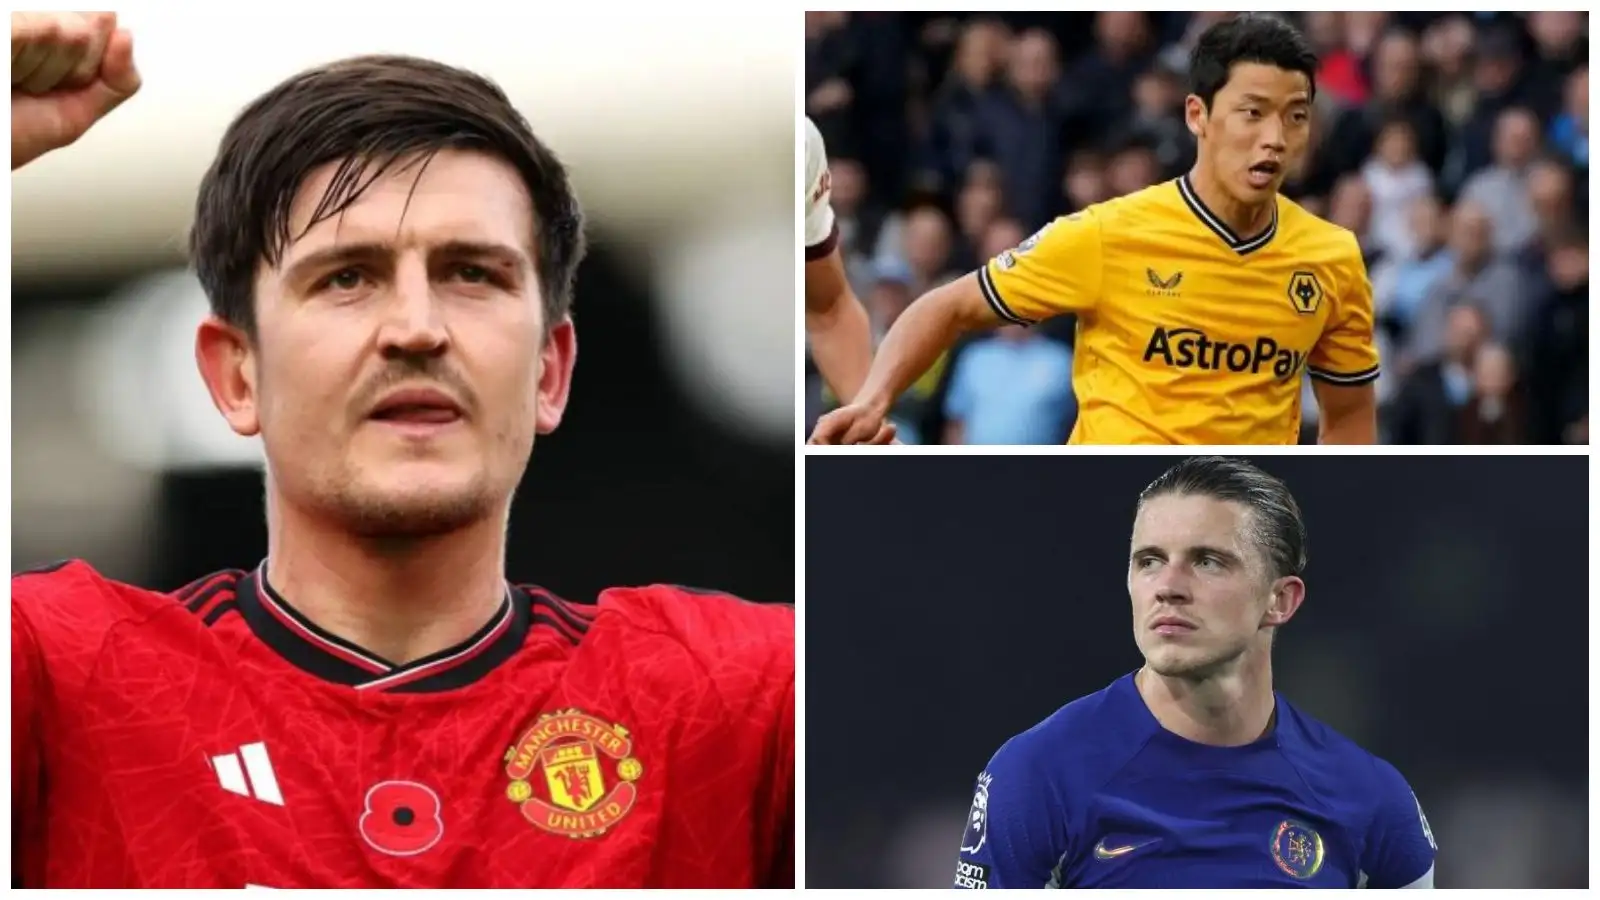 Manchester United's Harry Maguire, Wolves' Hwang Hee-chan and Chelsea's Conor Gallagher have all performed very well this season.